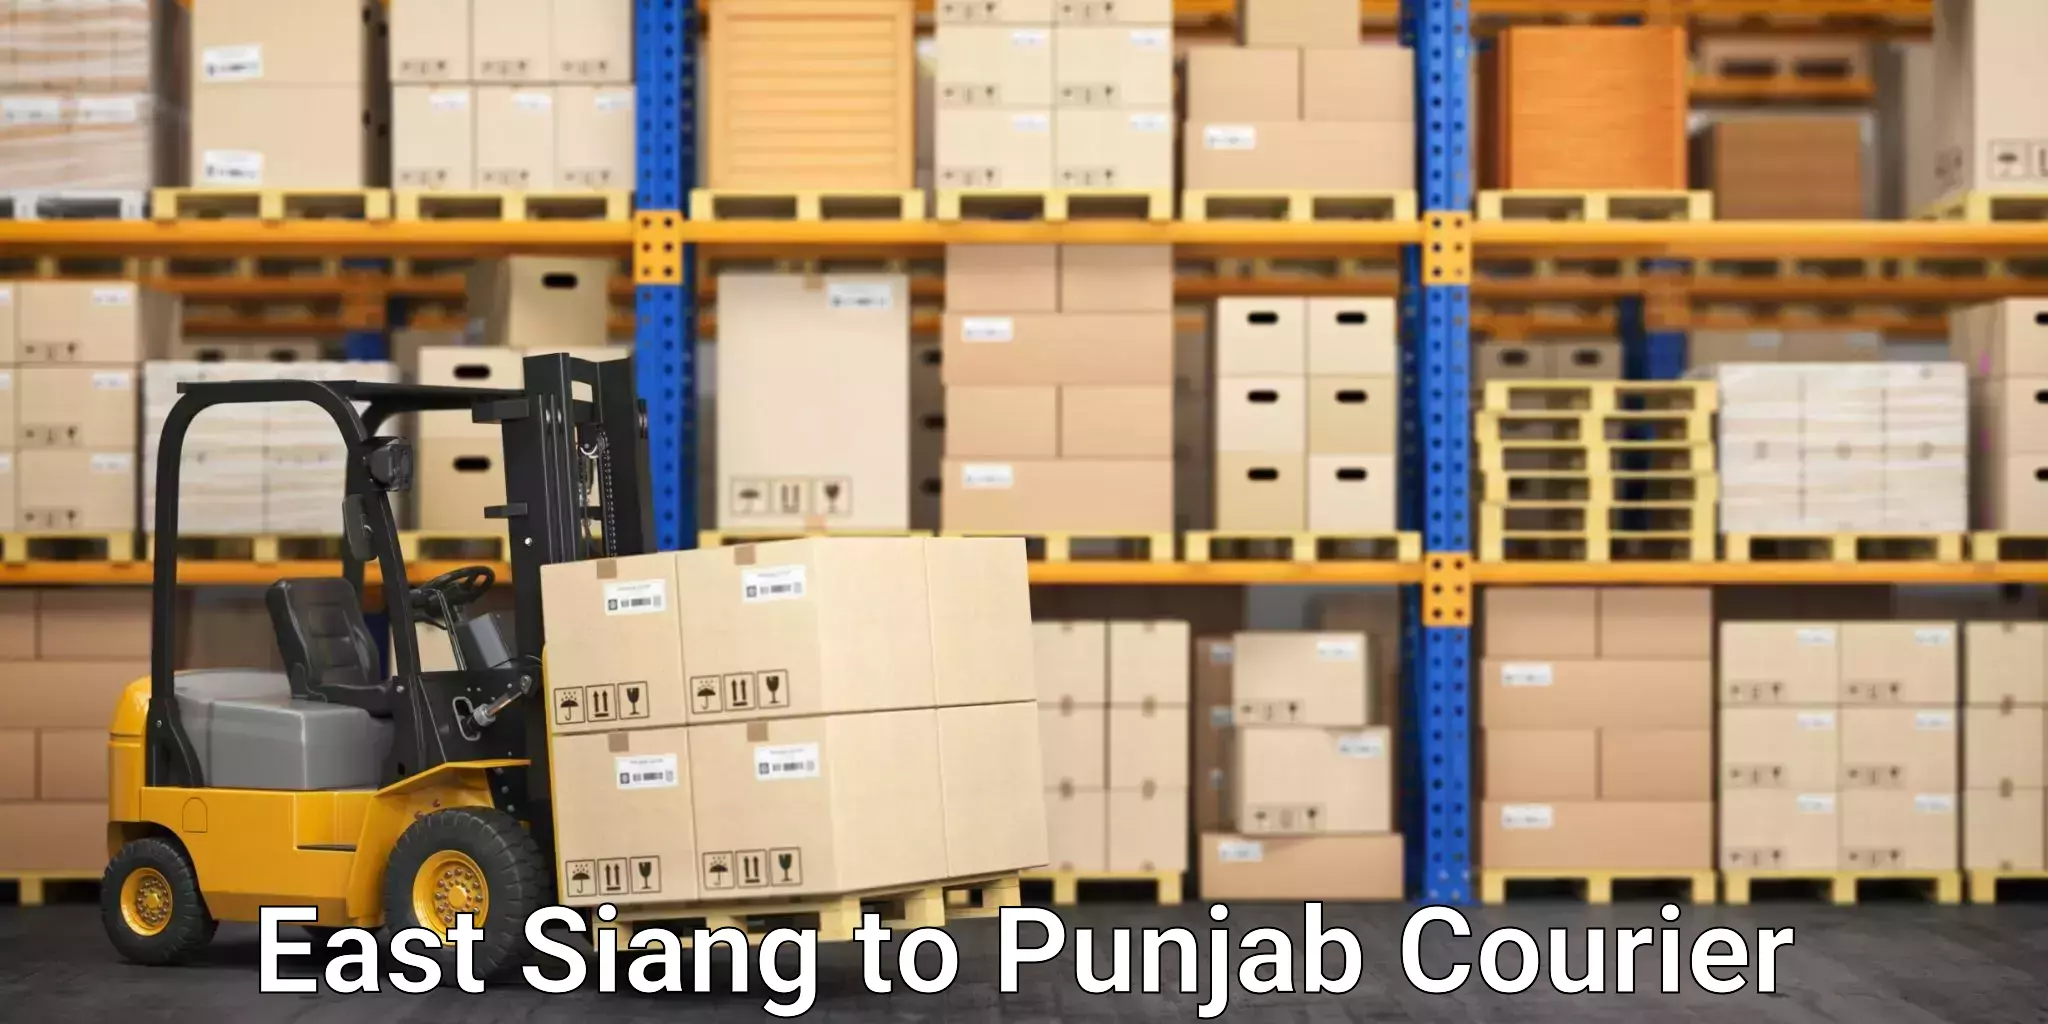 Advanced courier platforms East Siang to Punjab